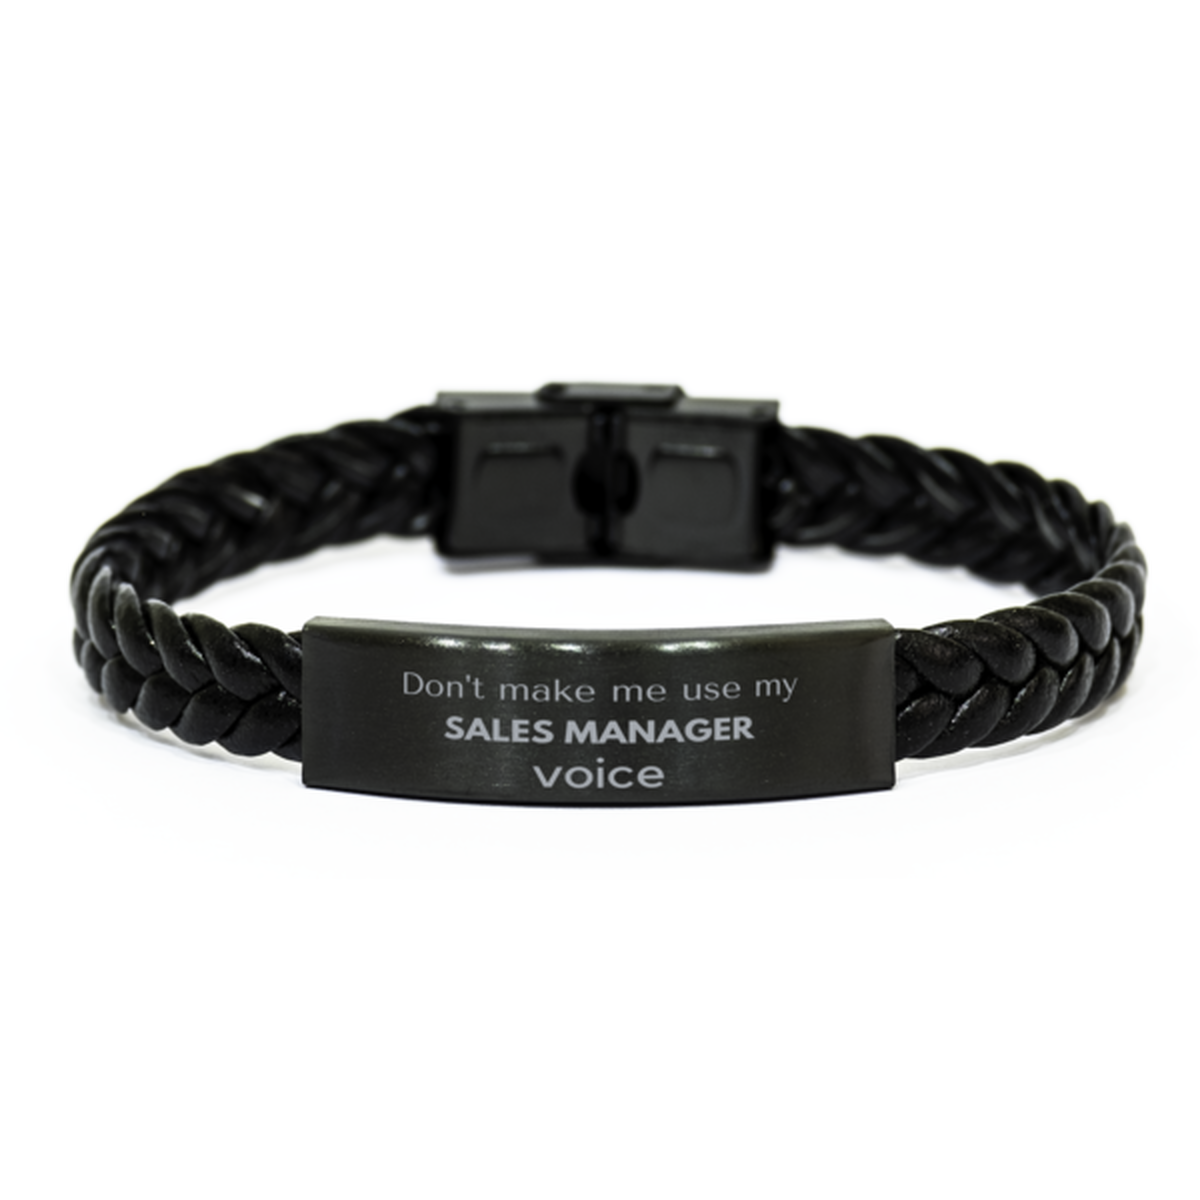 Don't make me use my Sales Manager voice, Sarcasm Sales Manager Gifts, Christmas Sales Manager Braided Leather Bracelet Birthday Unique Gifts For Sales Manager Coworkers, Men, Women, Colleague, Friends